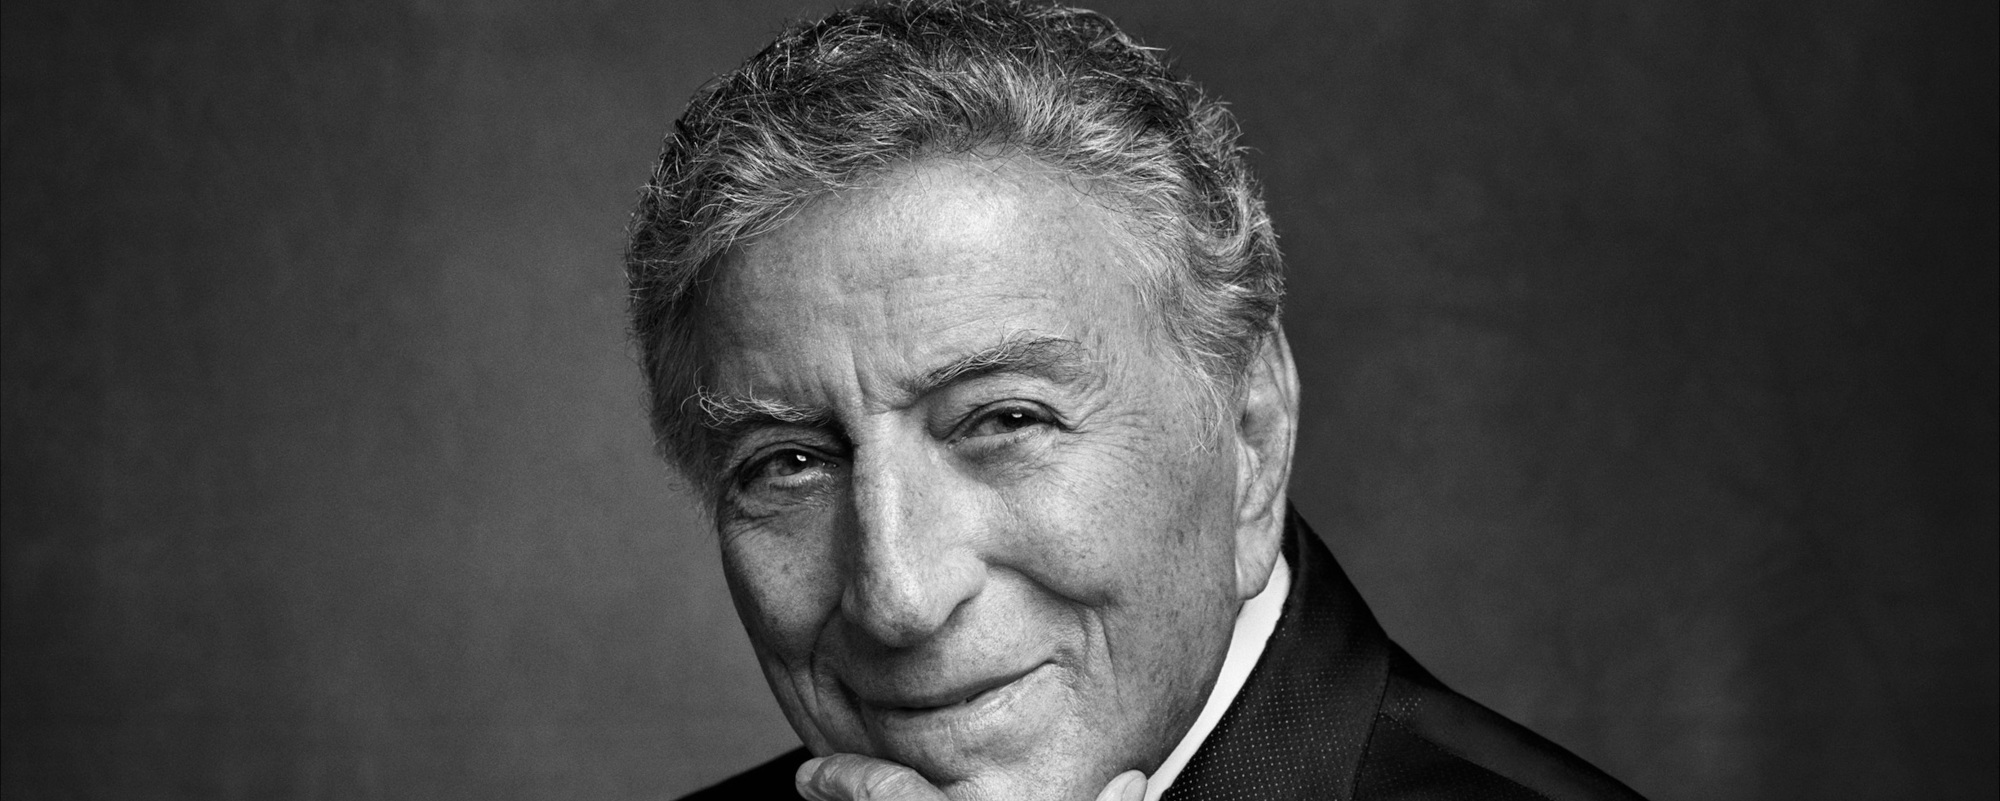 Tony Bennett Garners 6 Grammy Nominations at 95 Years Old for Lady Gaga Collab